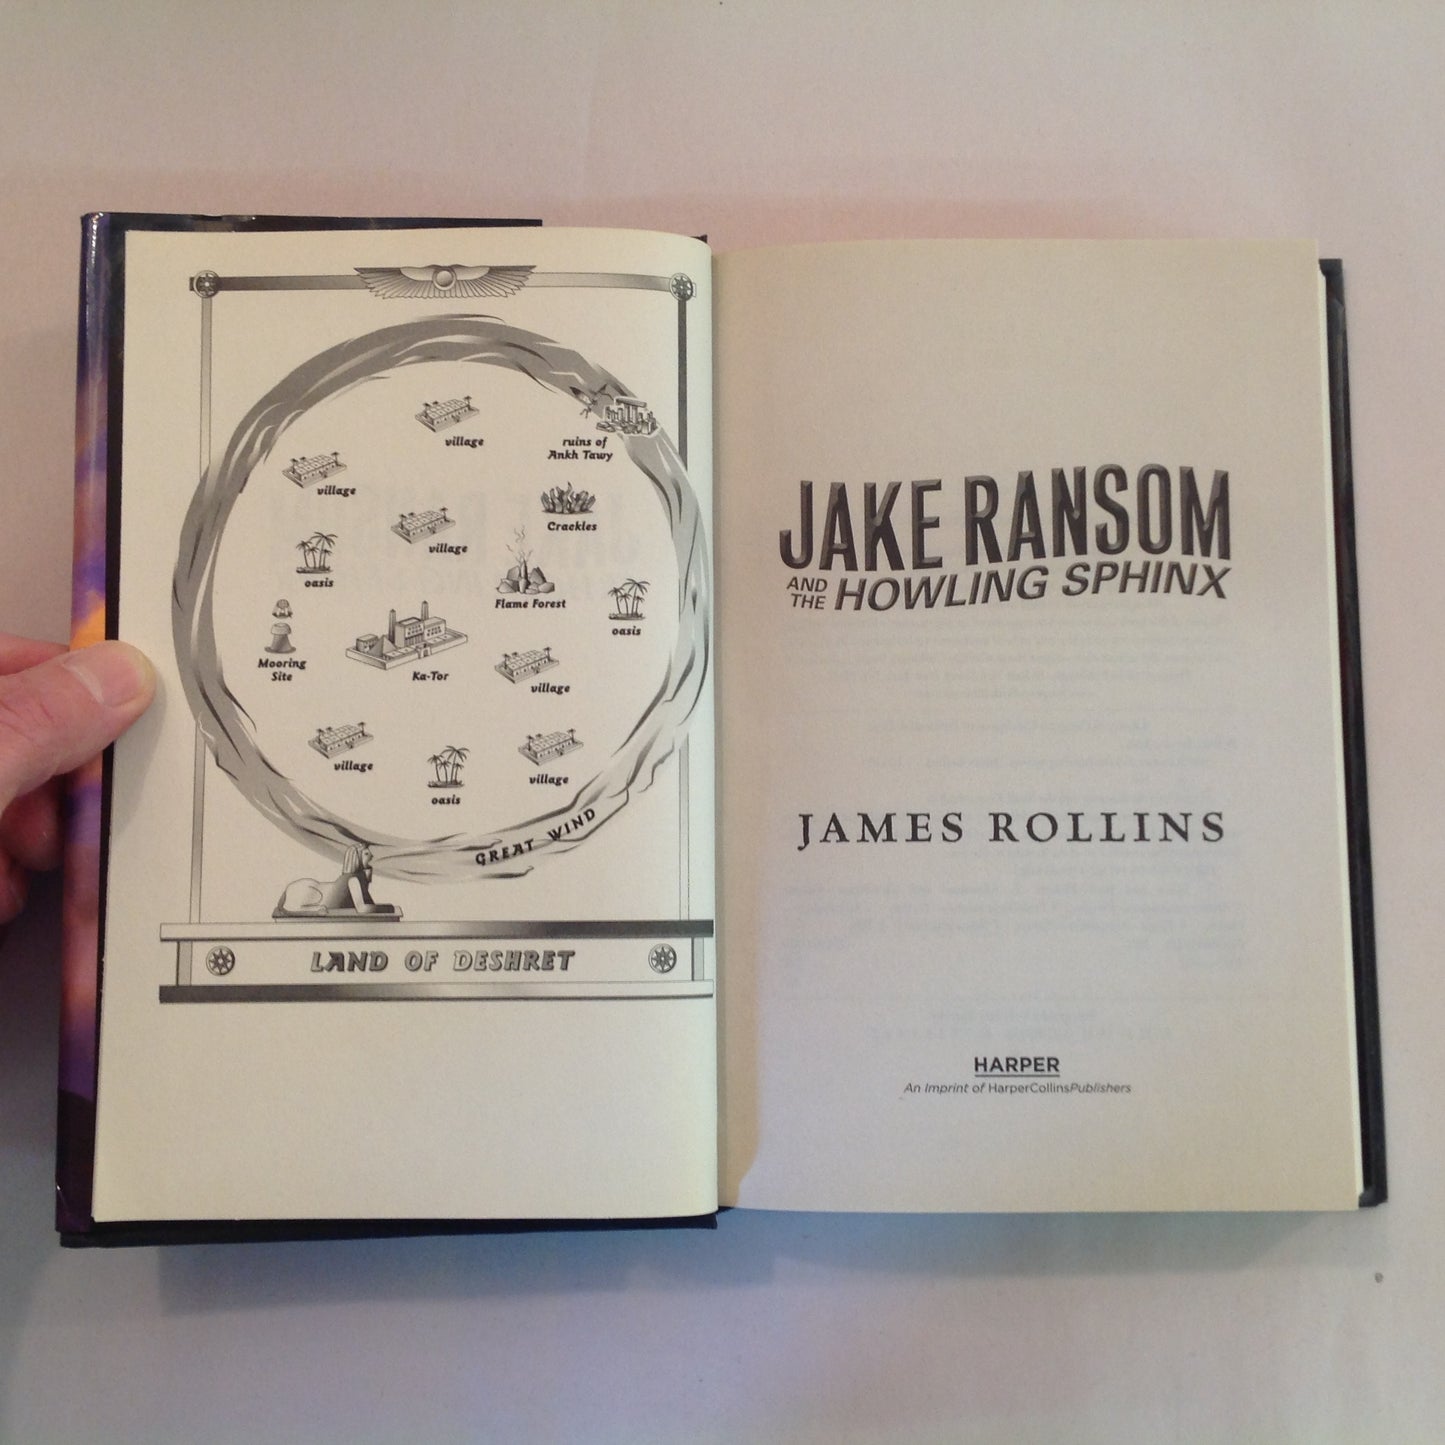 2011 Hardcover Jake Ransom and the Howling Sphinx James Rollins 1st